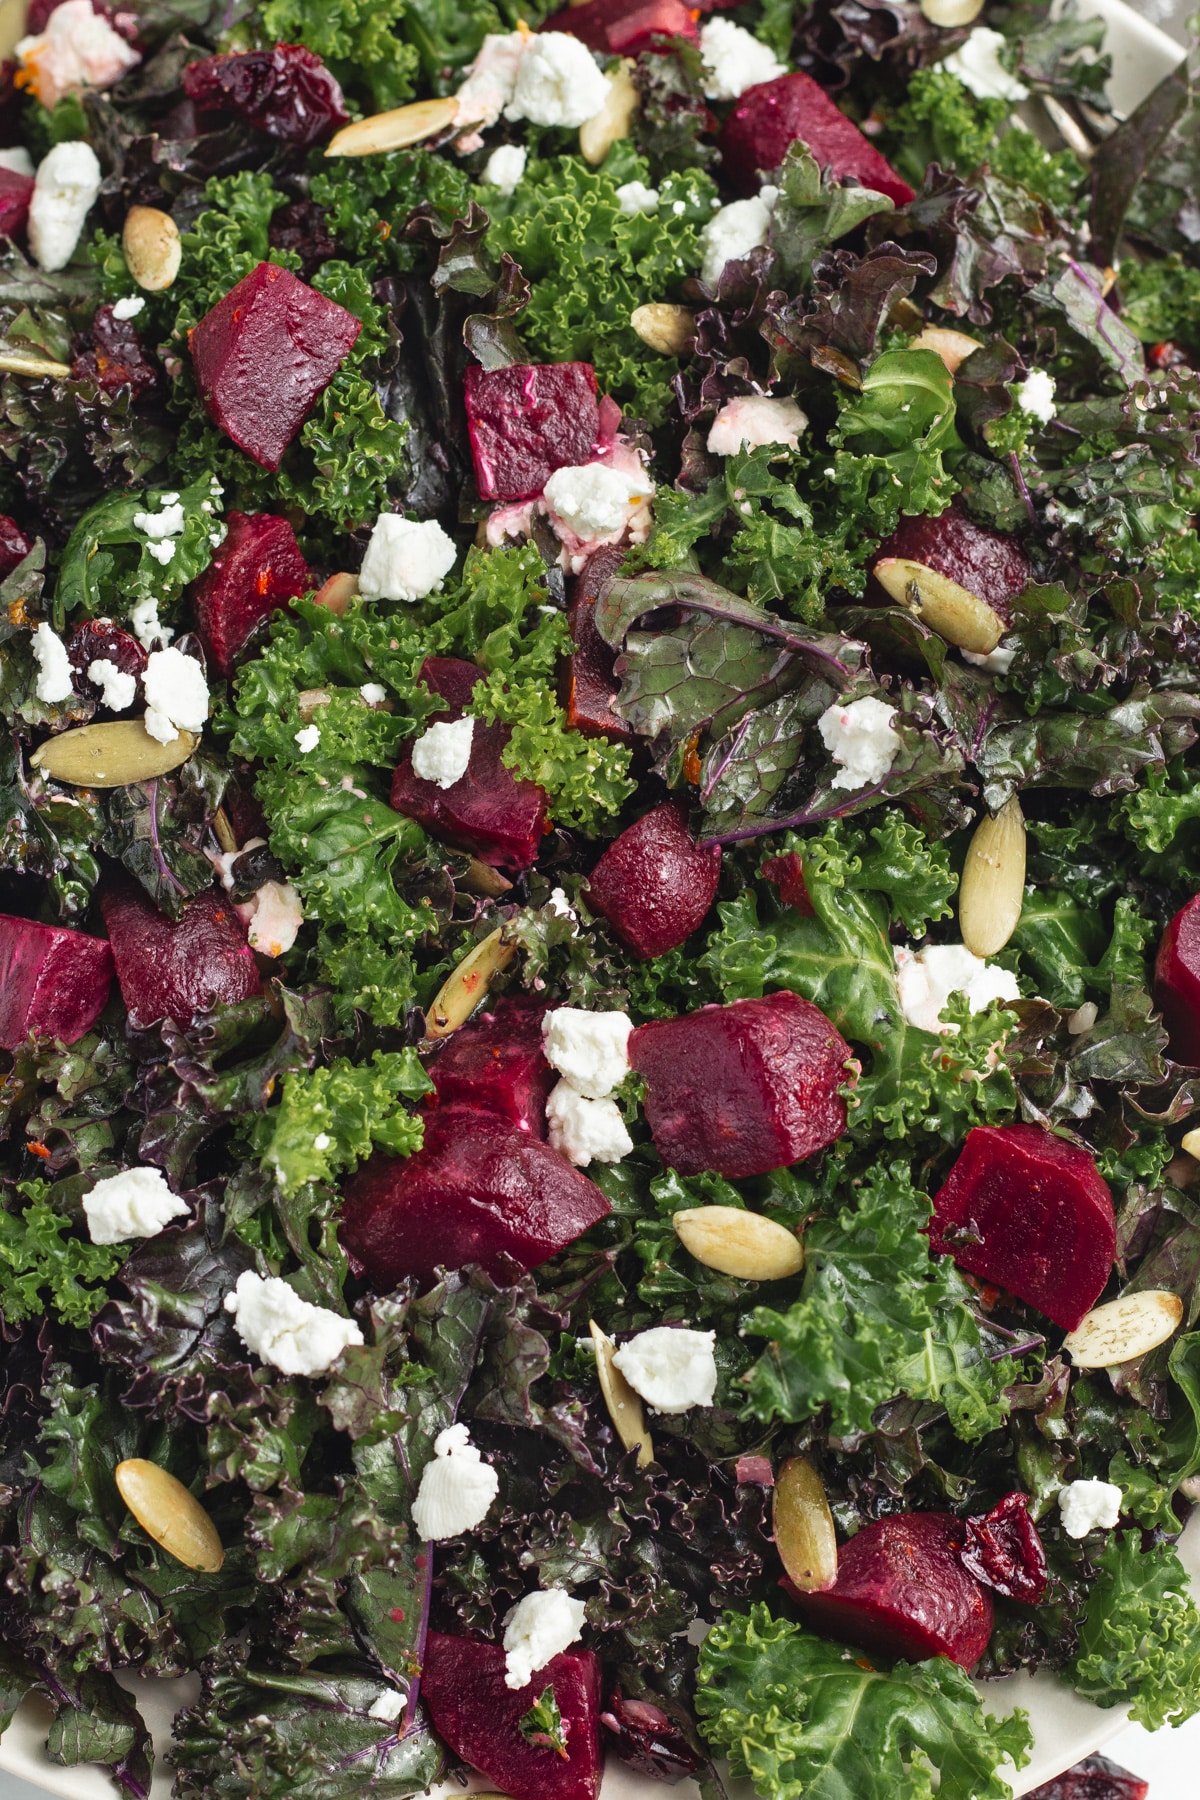 This is a close up picture of the kale salad.